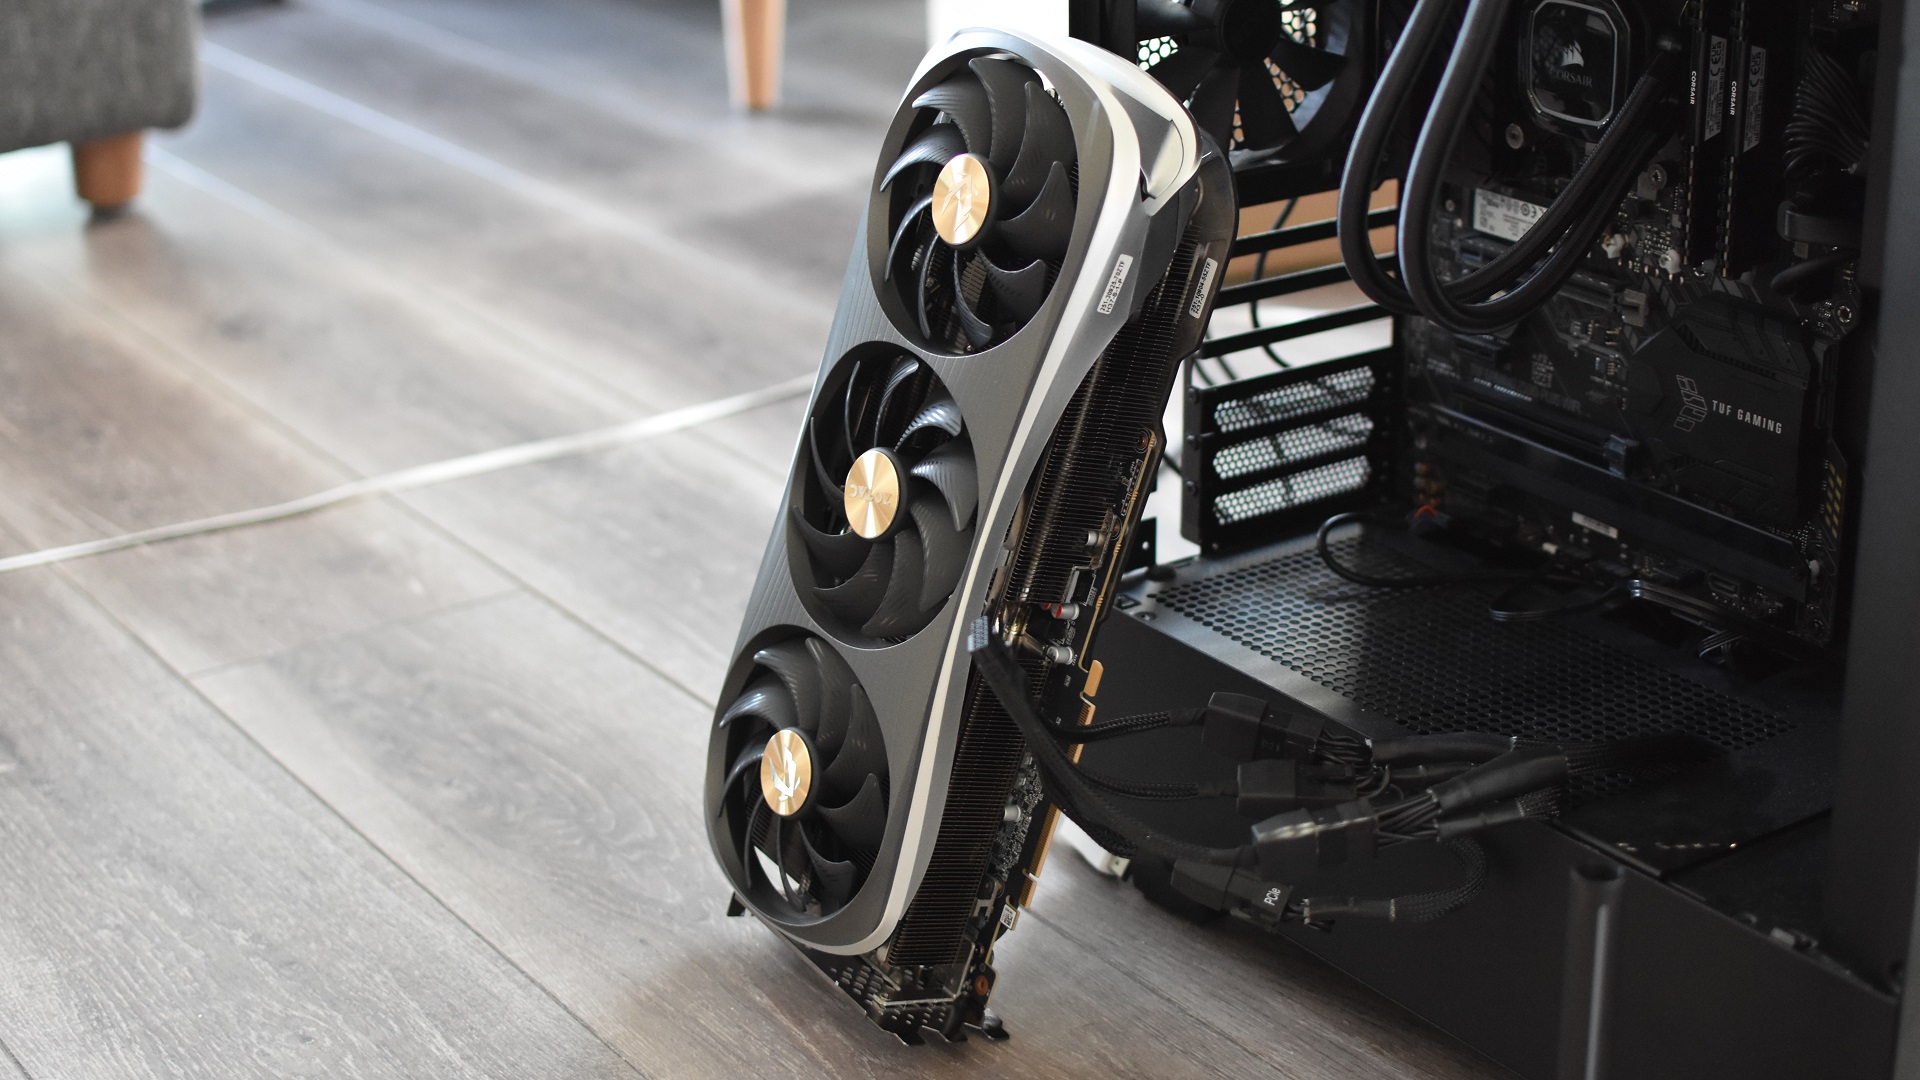 A Zotac Gaming GeForce RTX 4090 Amp Extreme Airo graphics card propped up against a PC case.